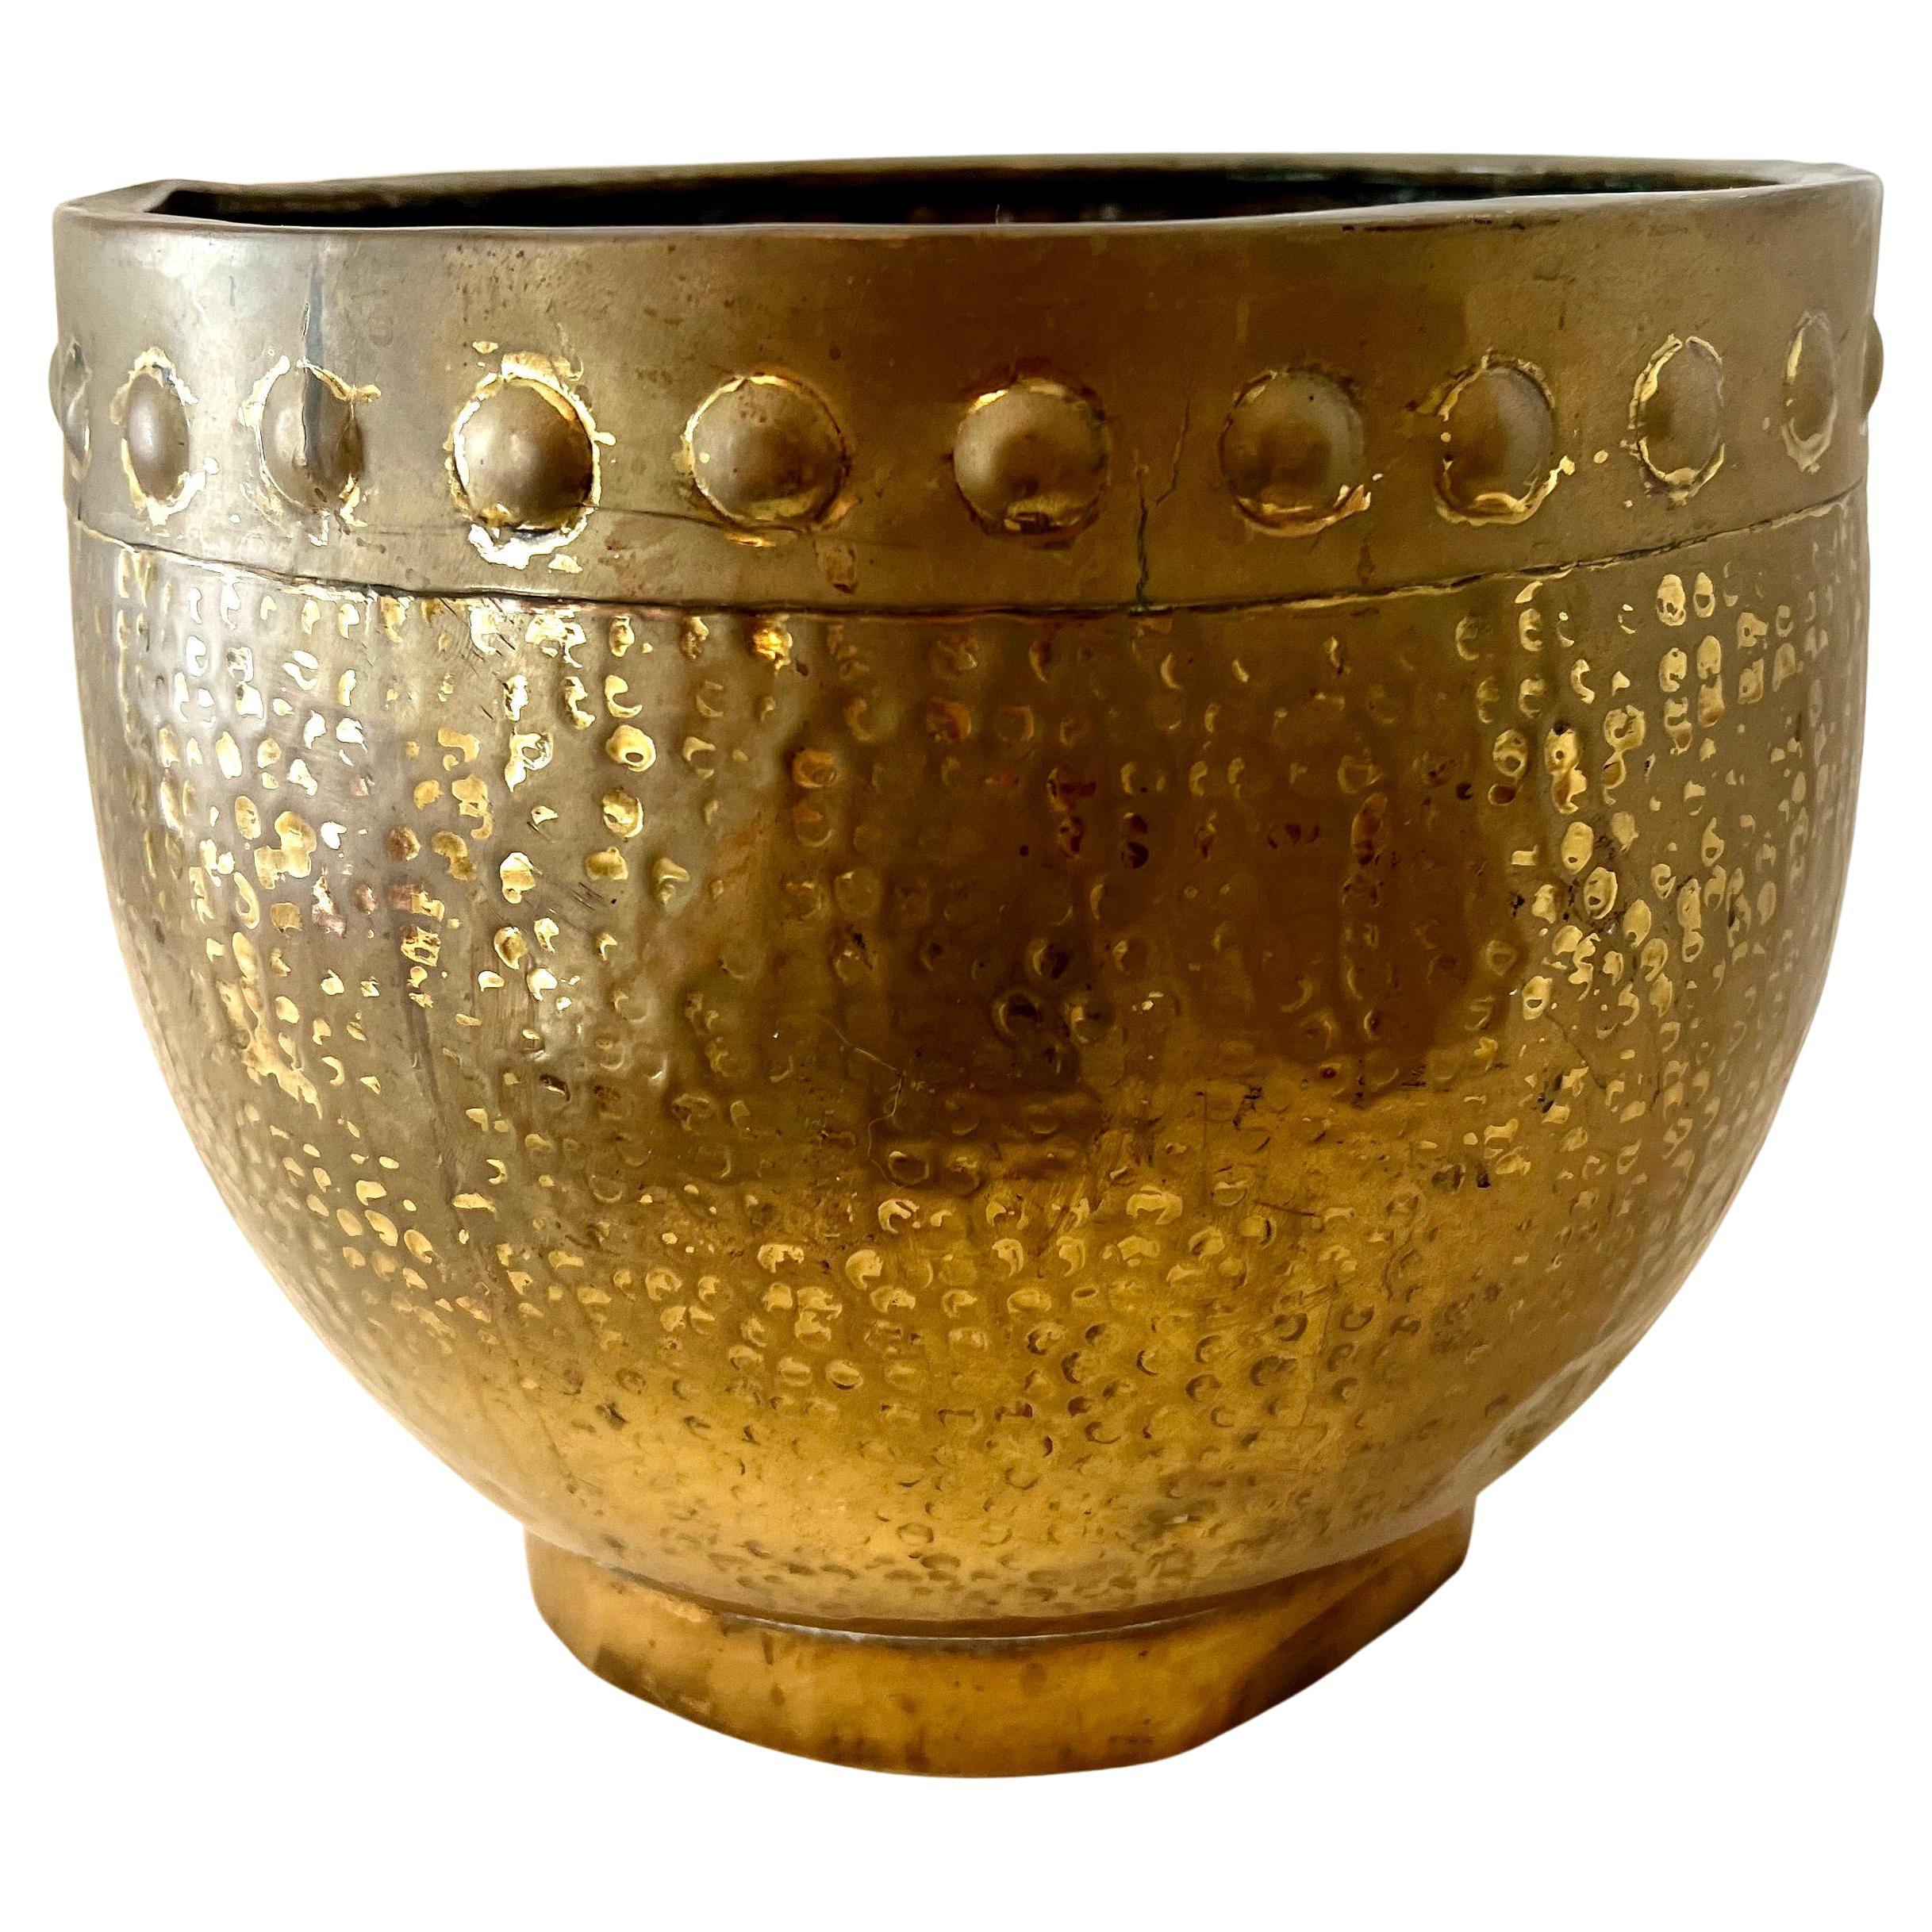 A very nice Cachepot Jardiniere or planter. The piece is hammered brass and has a nice rim detail - perfect for the interior or garden. A nice piece for an indoor plant, on an entry, side or console table.

A compliment to many settings - an old